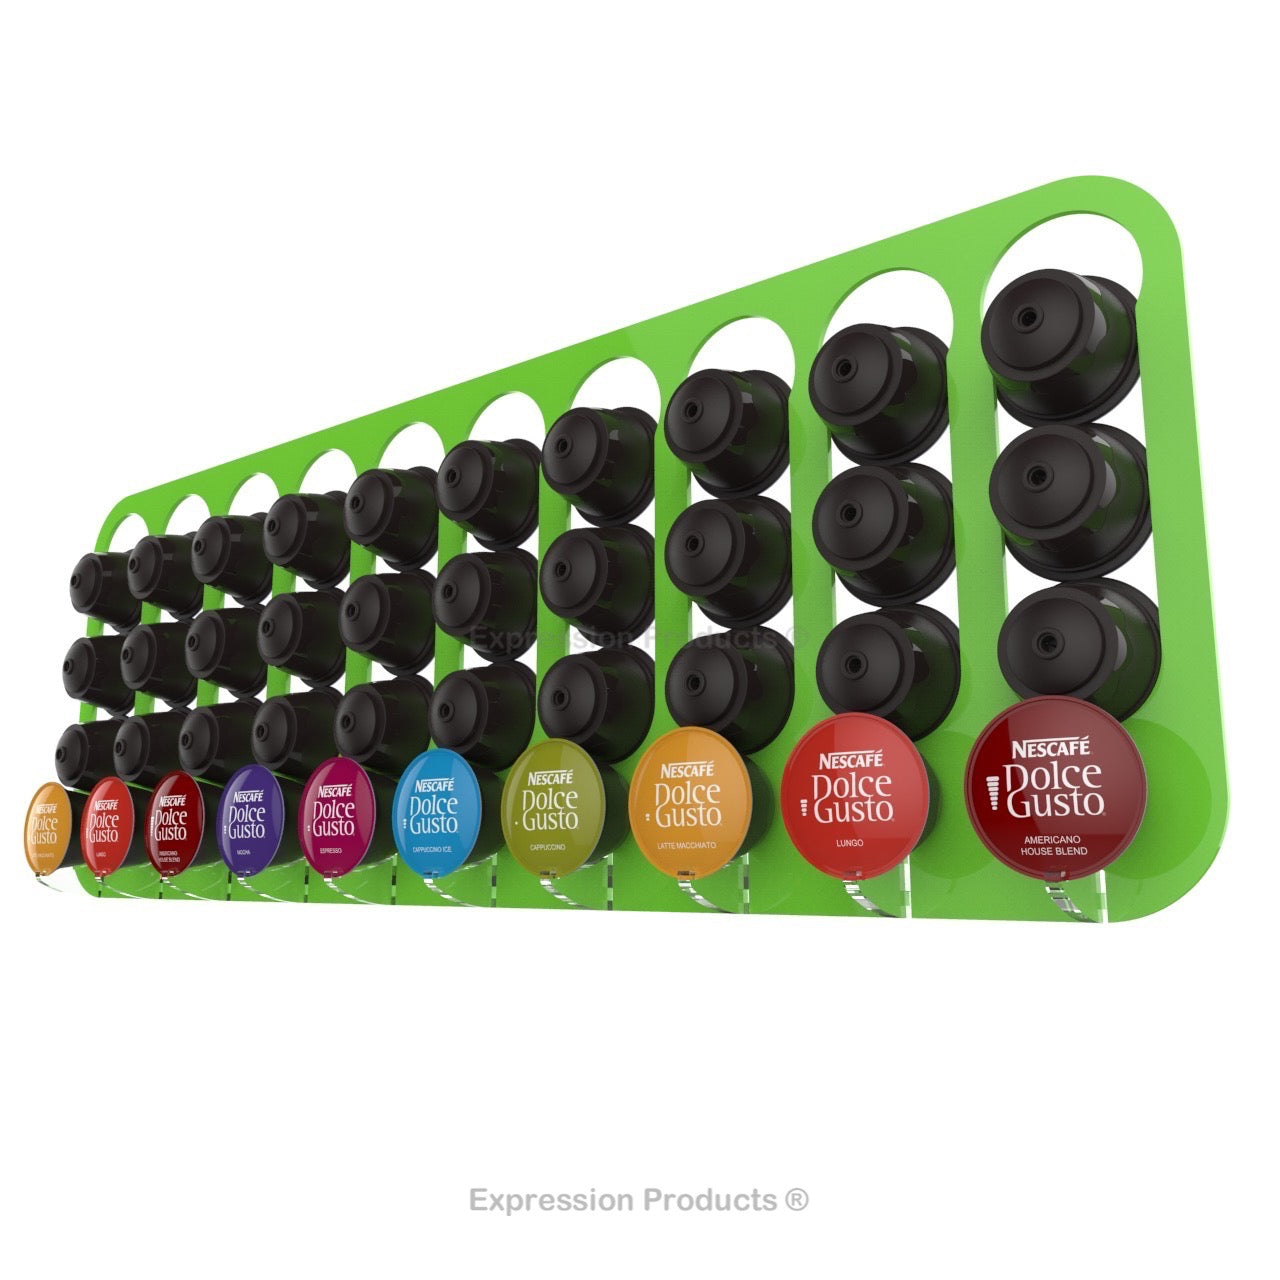 Dolce gusto coffee pod holder, wall mounted, half height.  Shown in lime holding 40 pods